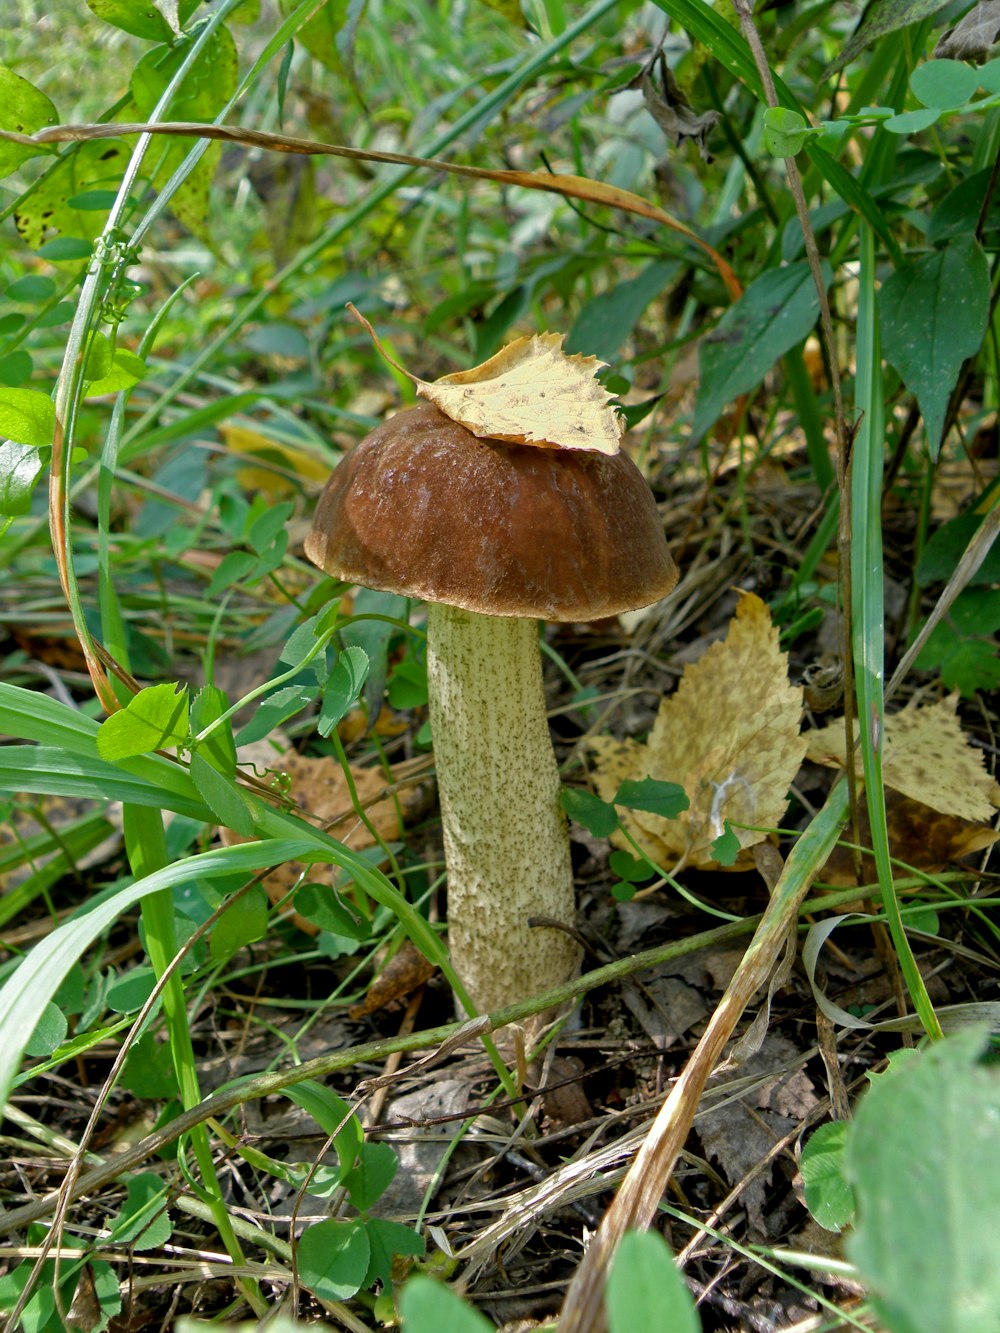 a brown mushroom sitting on the ground in the grass